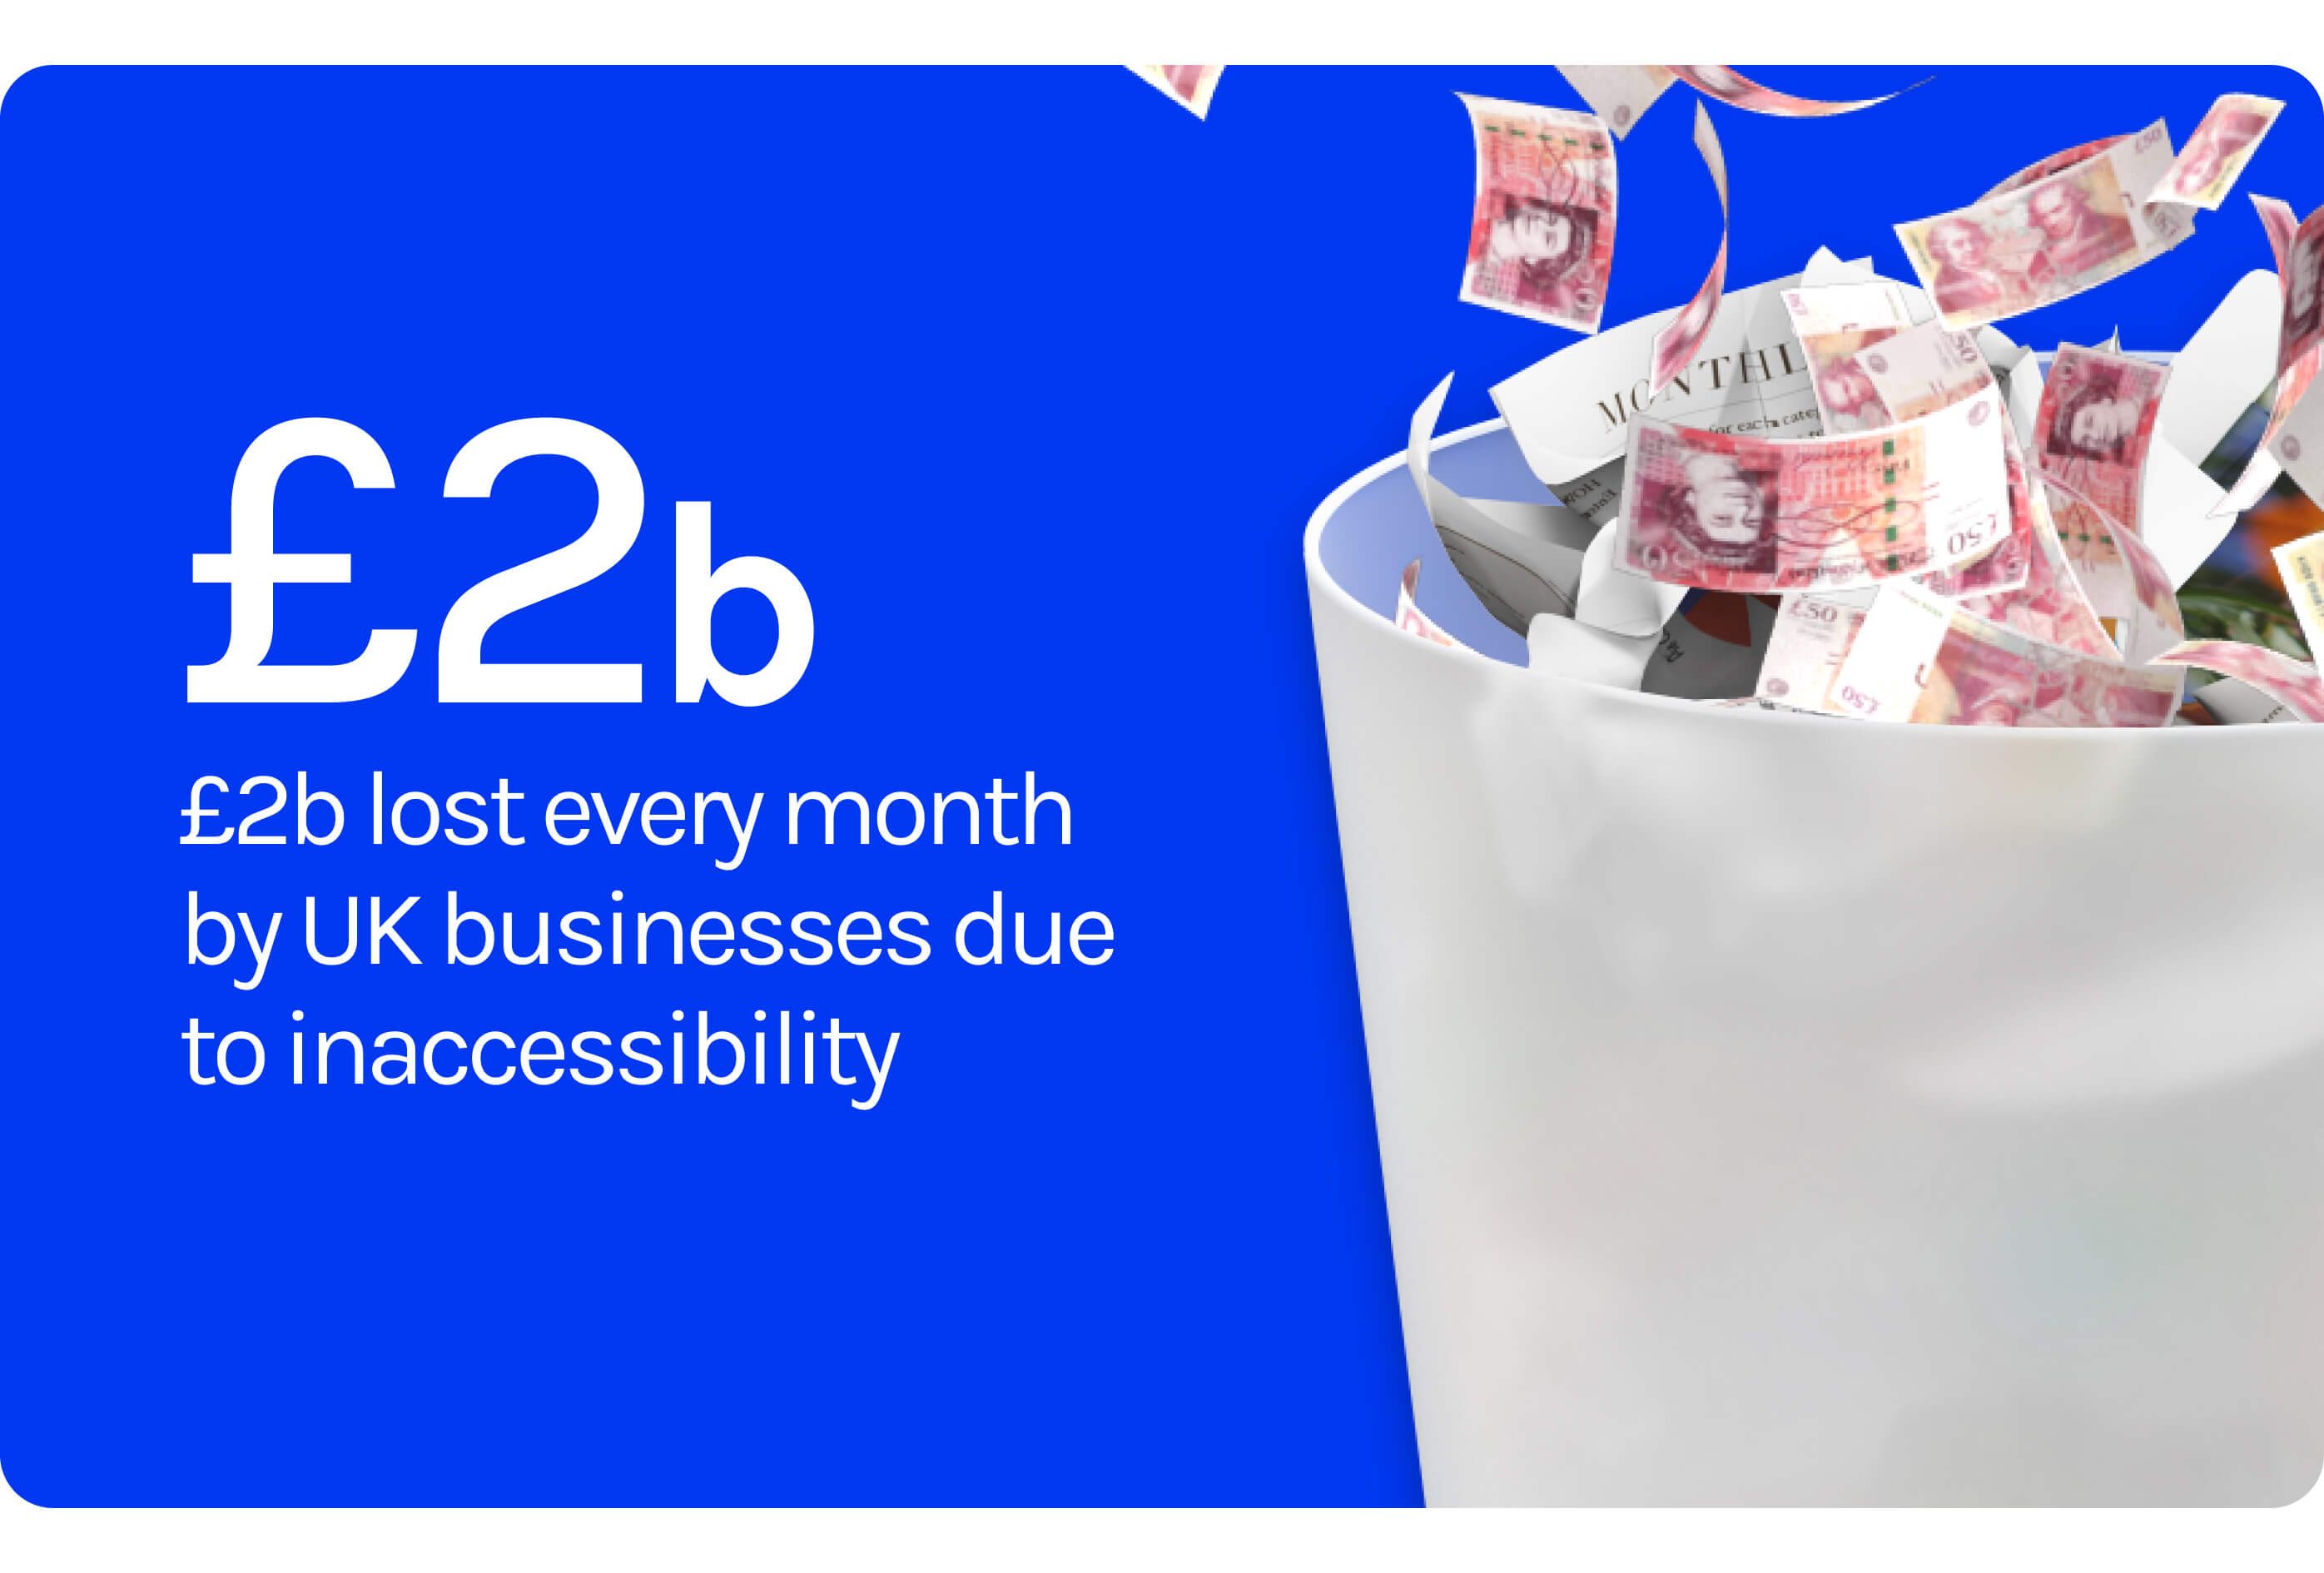 £2b lost every month by UK businesses due to inaccessibility